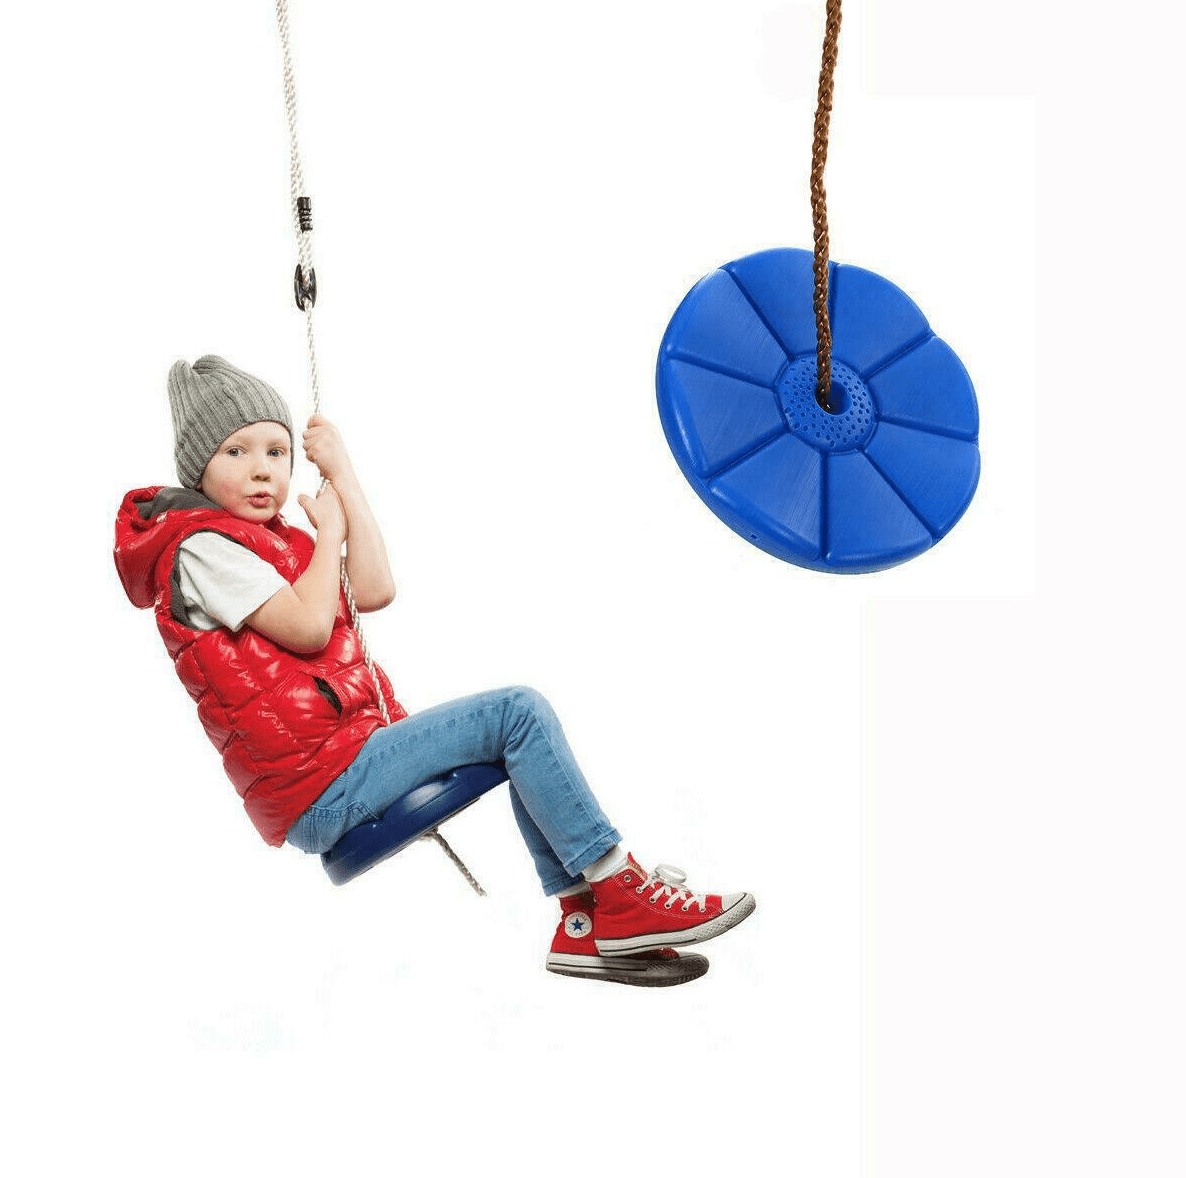 Daisy Disc Swing Seat Blue Set Kids Play Gym Accessories With Free Rope Outdoor 